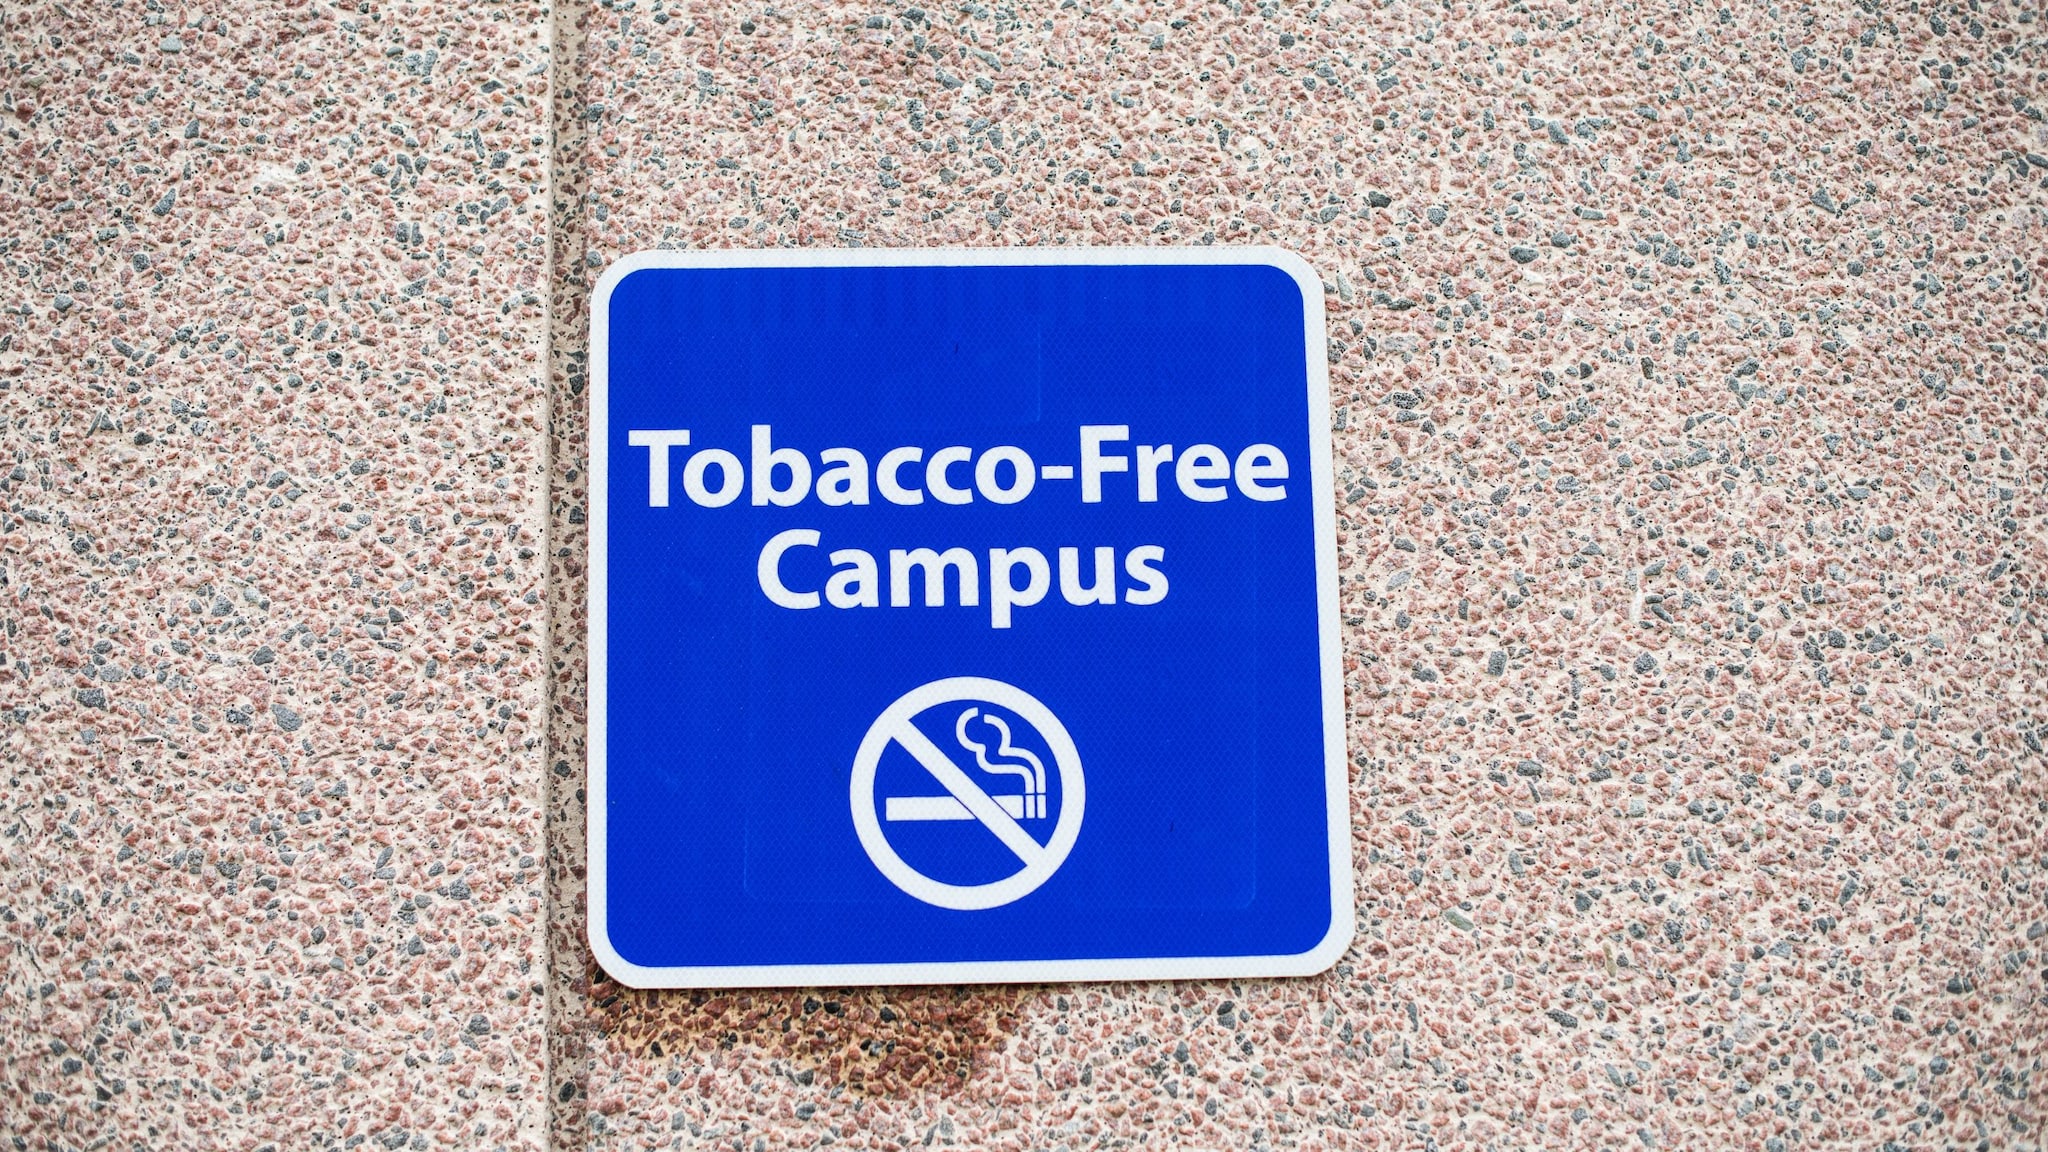 A tobacco-free campus sign hanging on a stone wall.